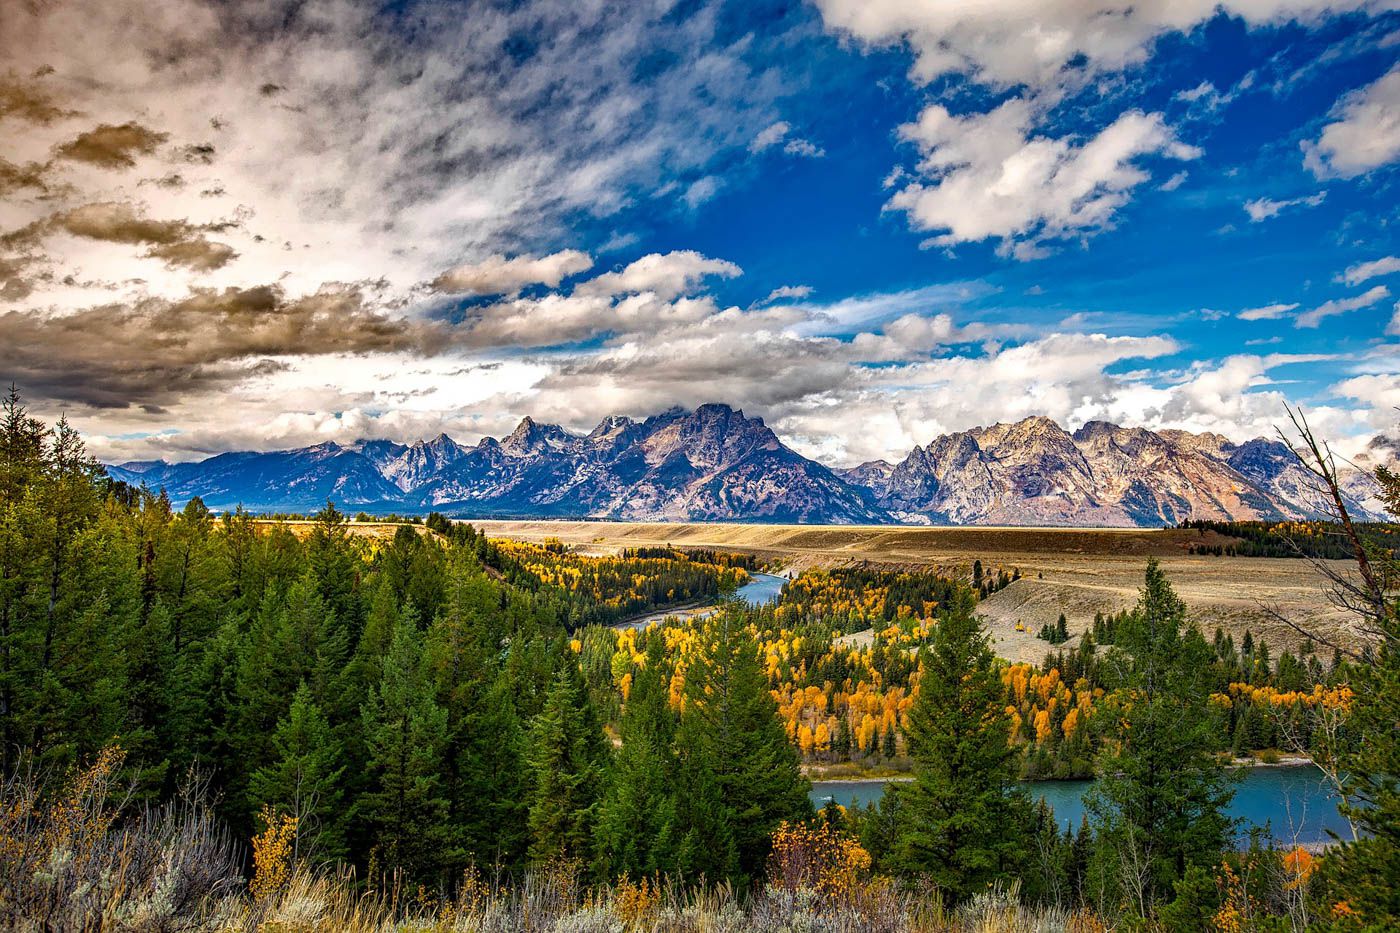 Grand Teton National Park Travel Cost Average Price Of A Vacation To Grand Teton National Park Food Meal Budget Daily Weekly Expenses Budgetyourtrip Com